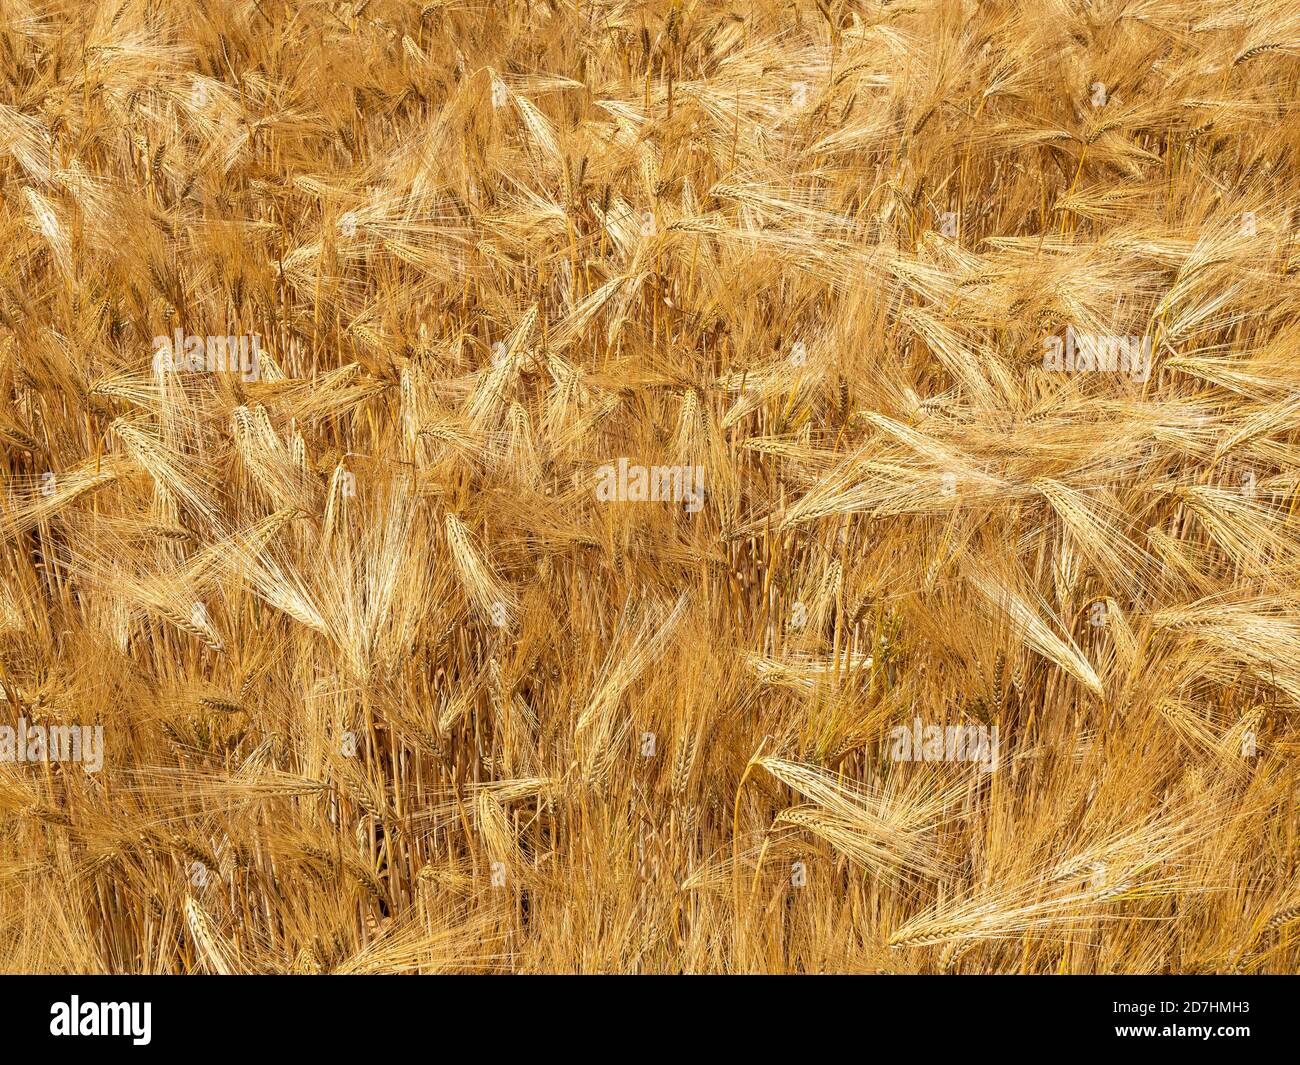 A close up of a small part of a field of 6 row barley ripe and golden ready for harvest Stock Photo